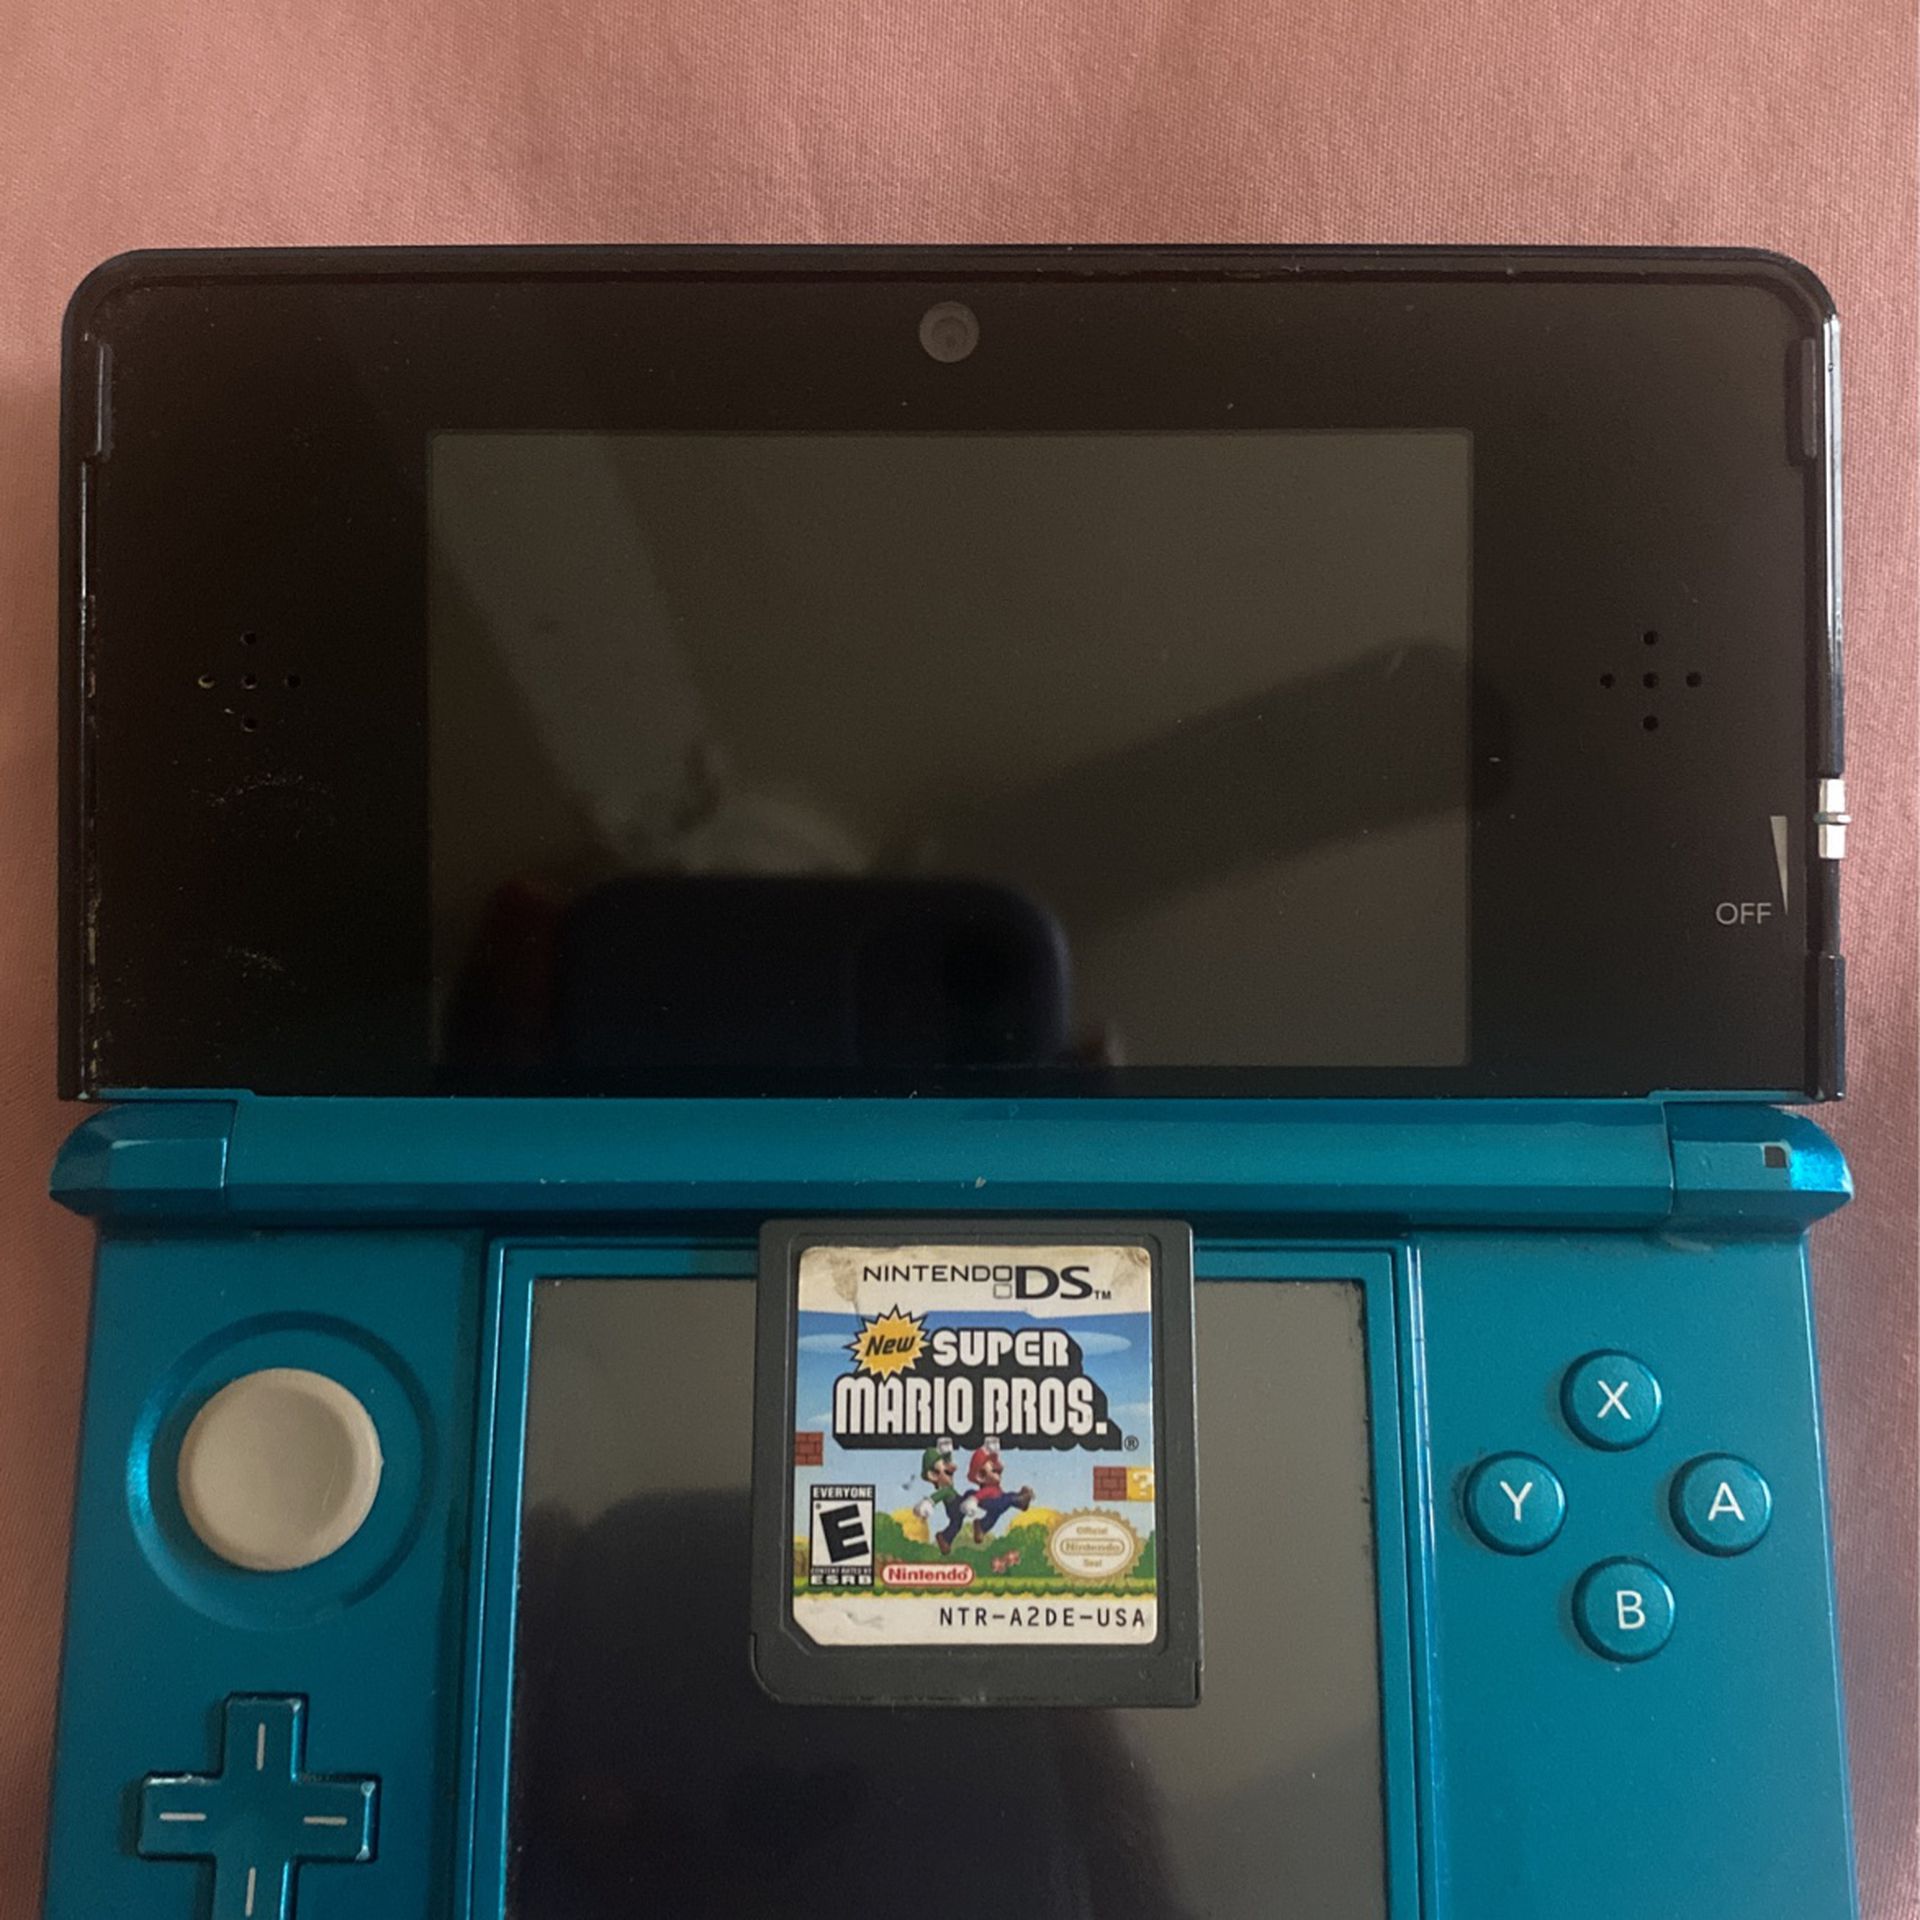 Nintendo 3DS (game included)